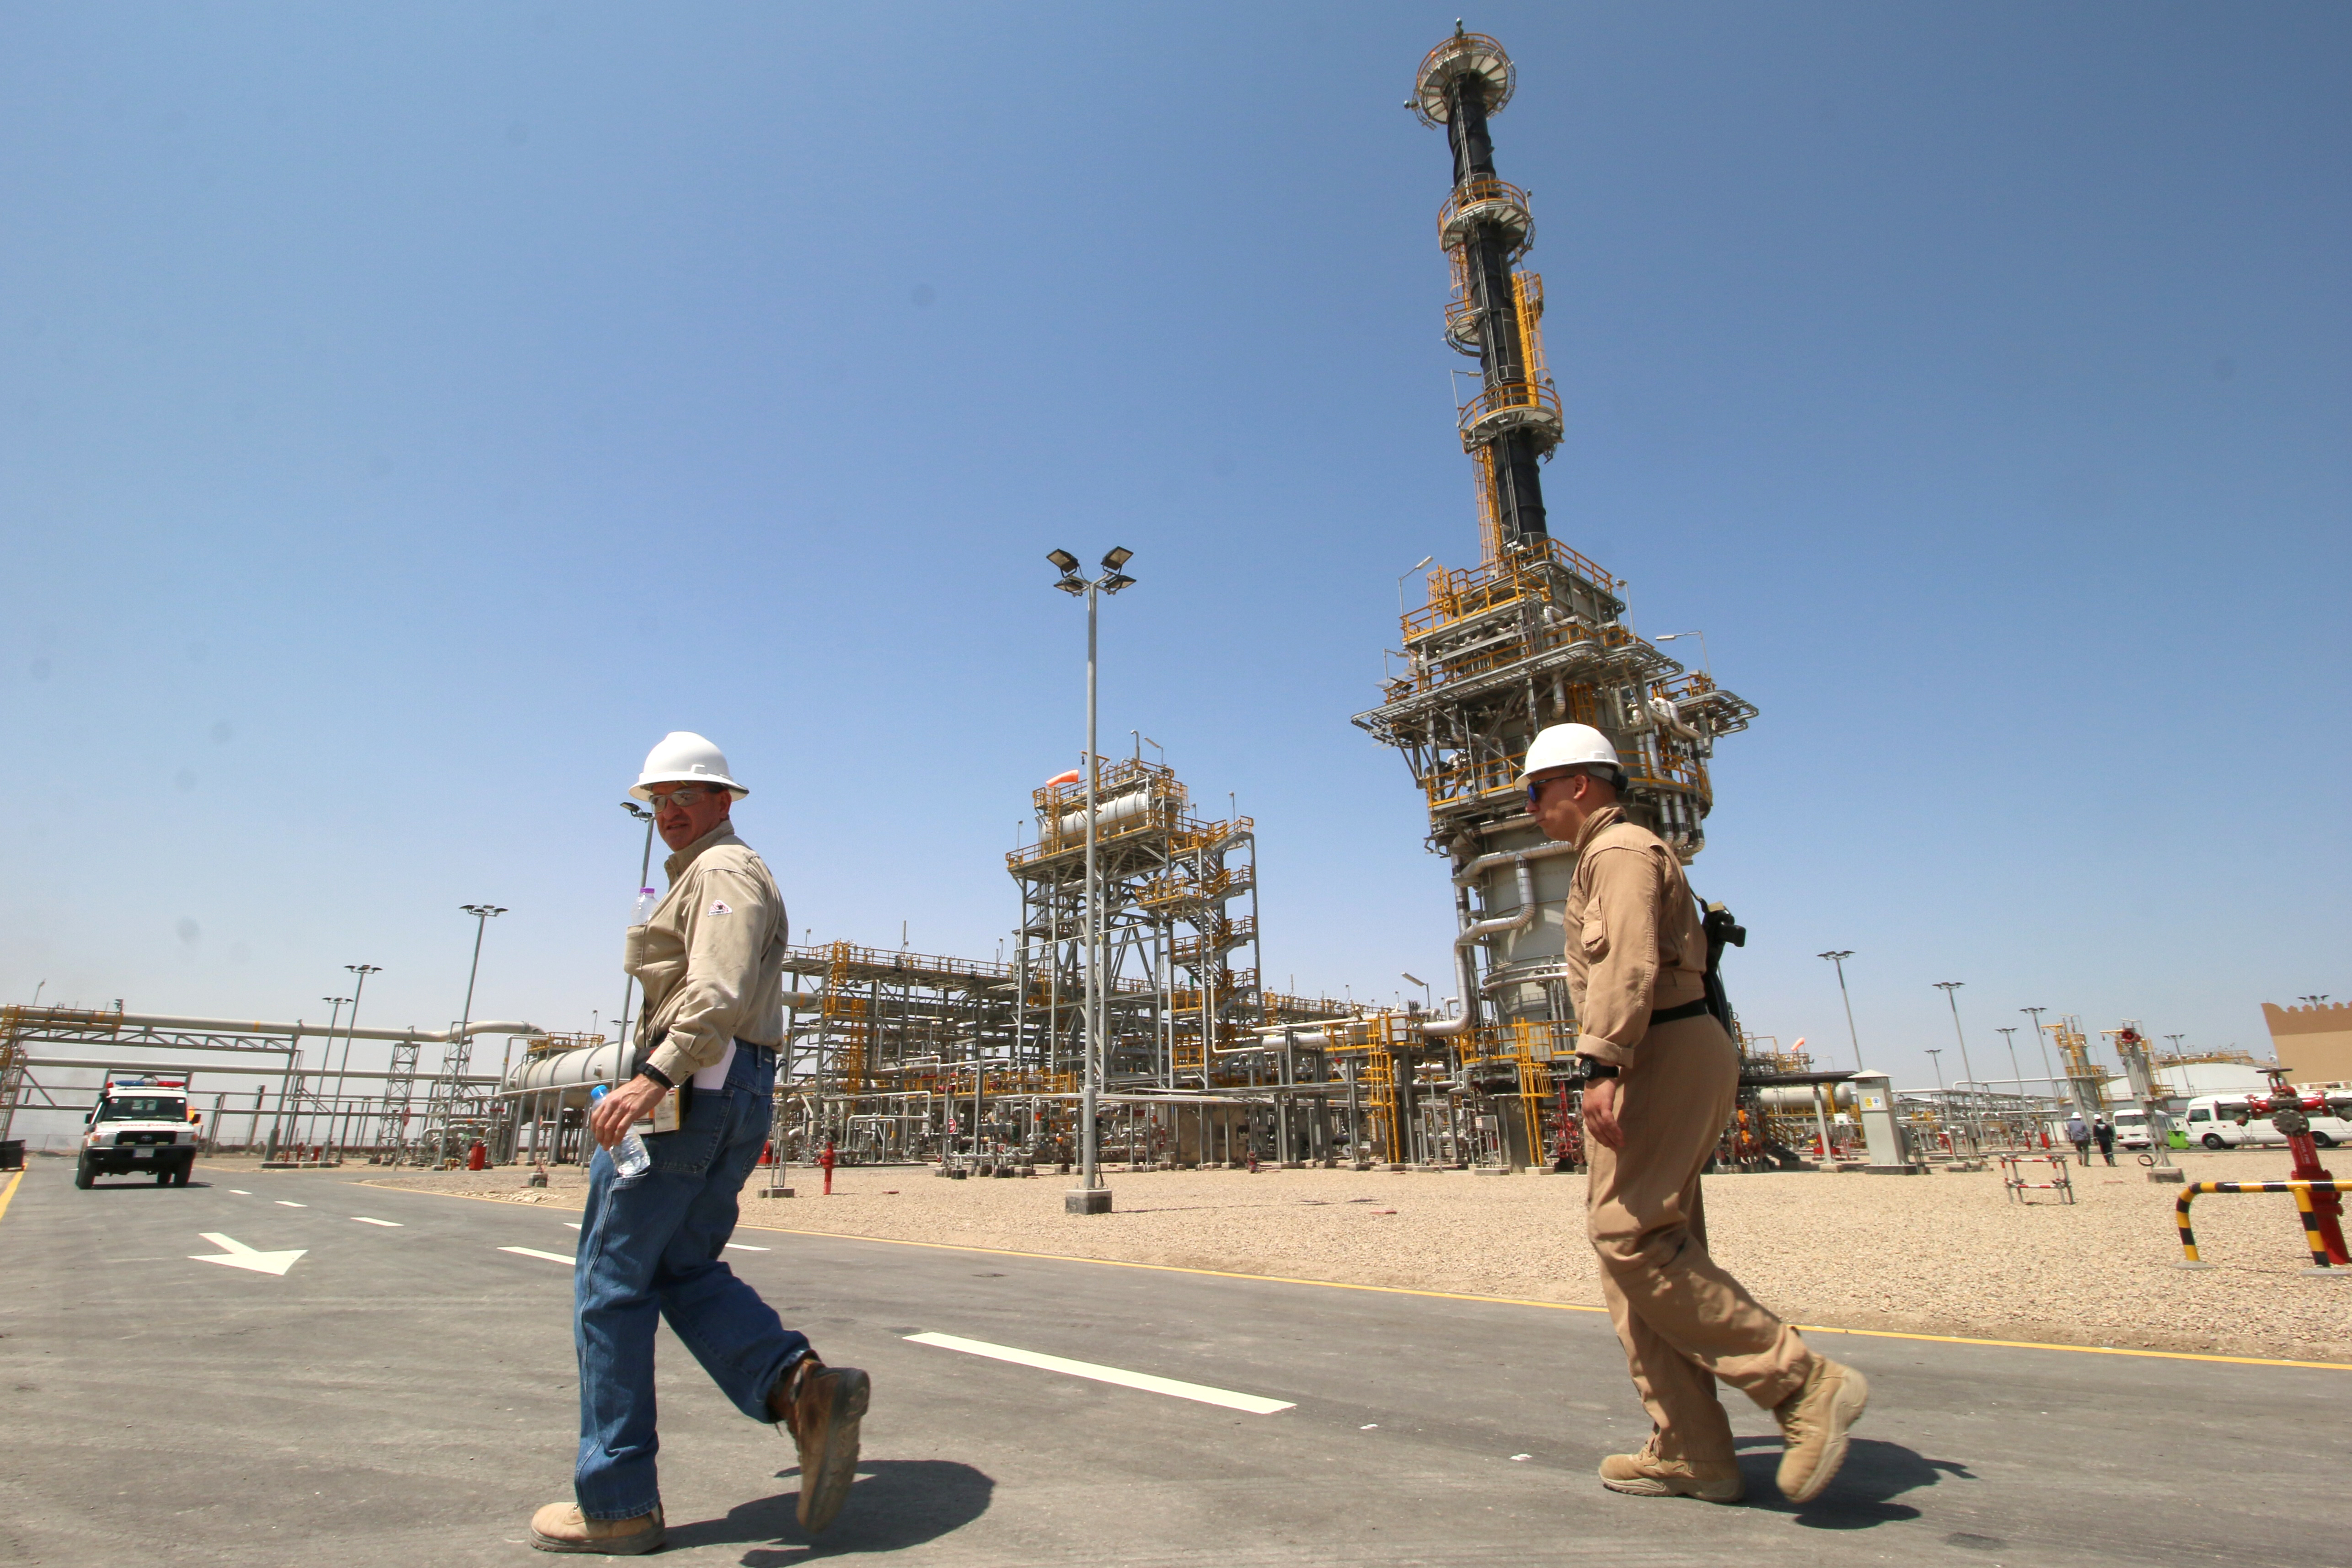 A member of security foreign personnel walks with an Exxon's foreign staff of the West Qurna-1 oilfield, which is operated by ExxonMobil, during the opening ceremony near Basra, Iraq June 17, 2019.  REUTERS/Essam Al-Sudani